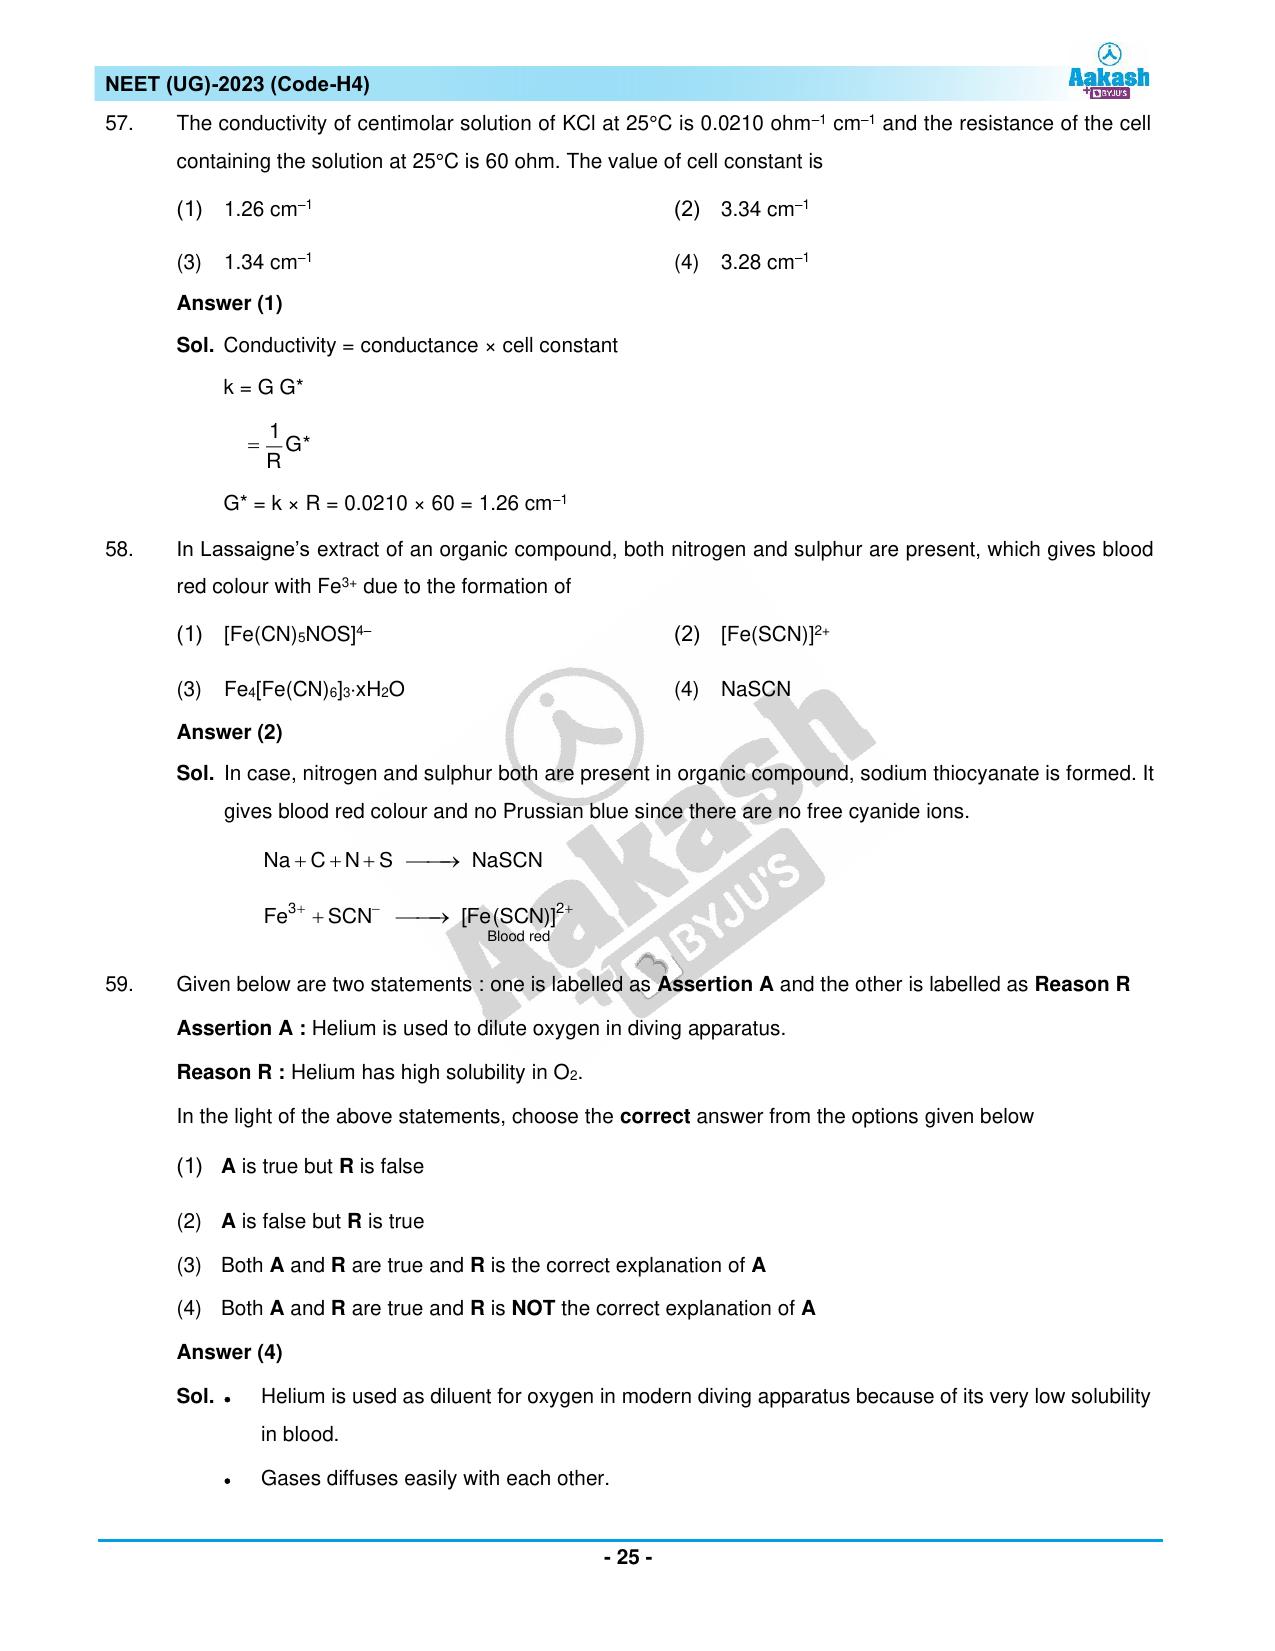 NEET 2023 Question Paper H4 - Page 25